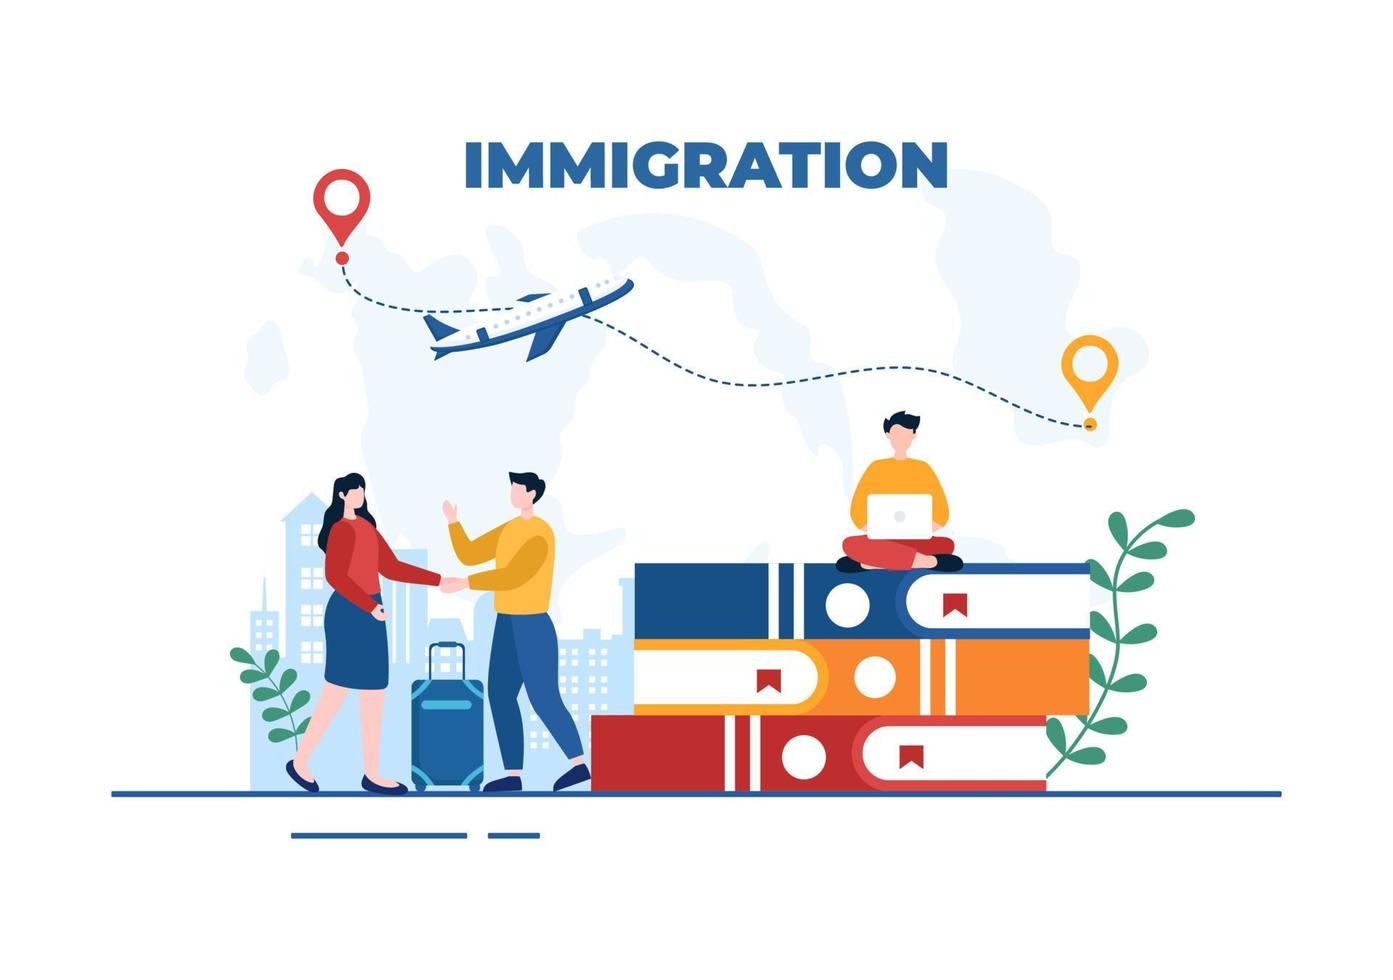 Immigration Template Hand Drawn Cartoon Flat Illustration of Document with Visa and Passport for Moving to Another Country vector